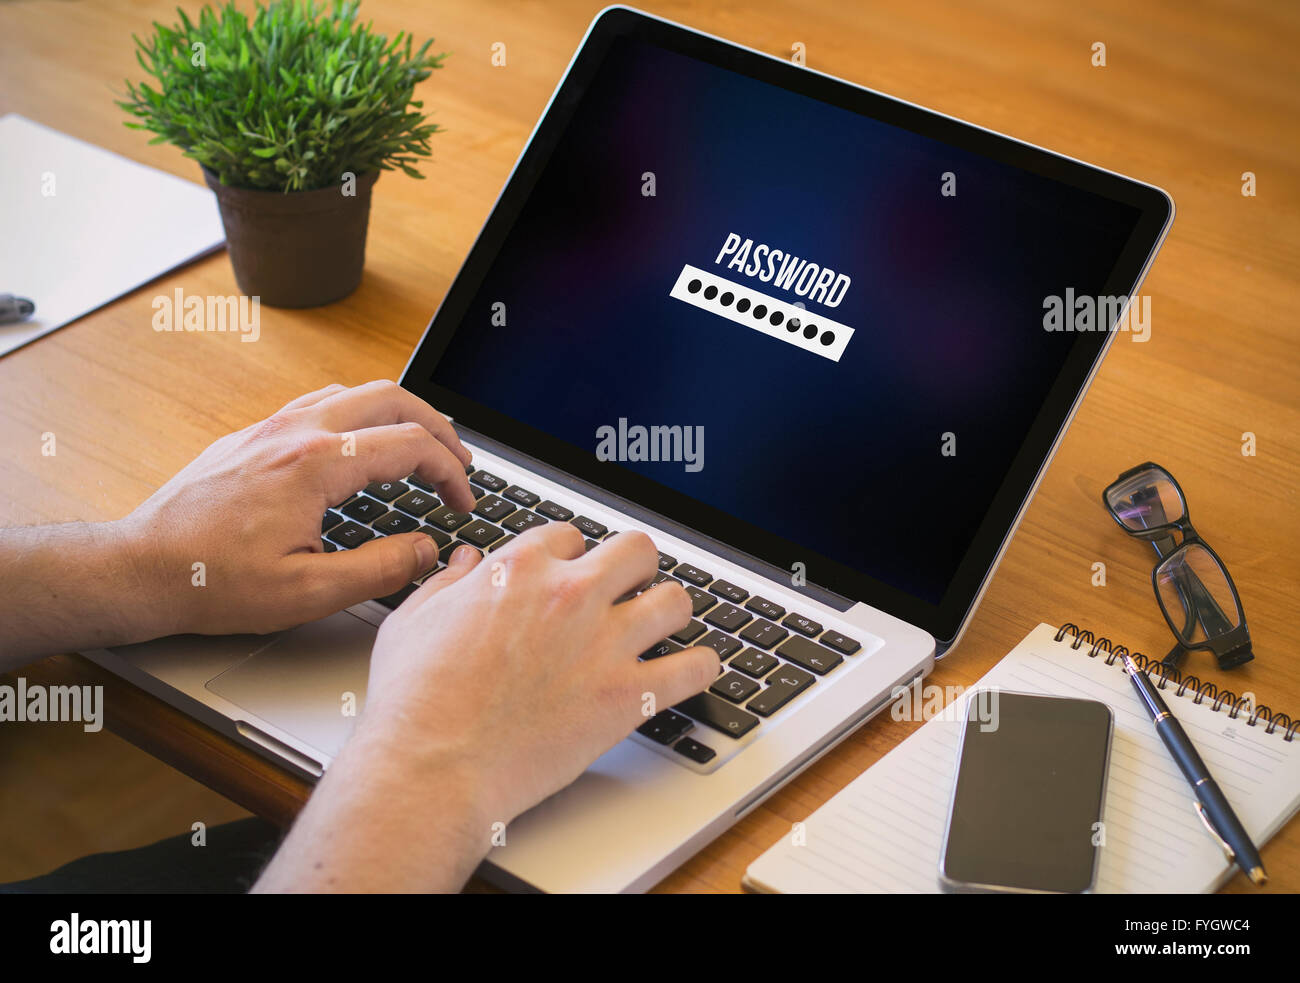 Businessman at work. Close-up top view of man working on laptop password. All screen graphics are made up. Stock Photo